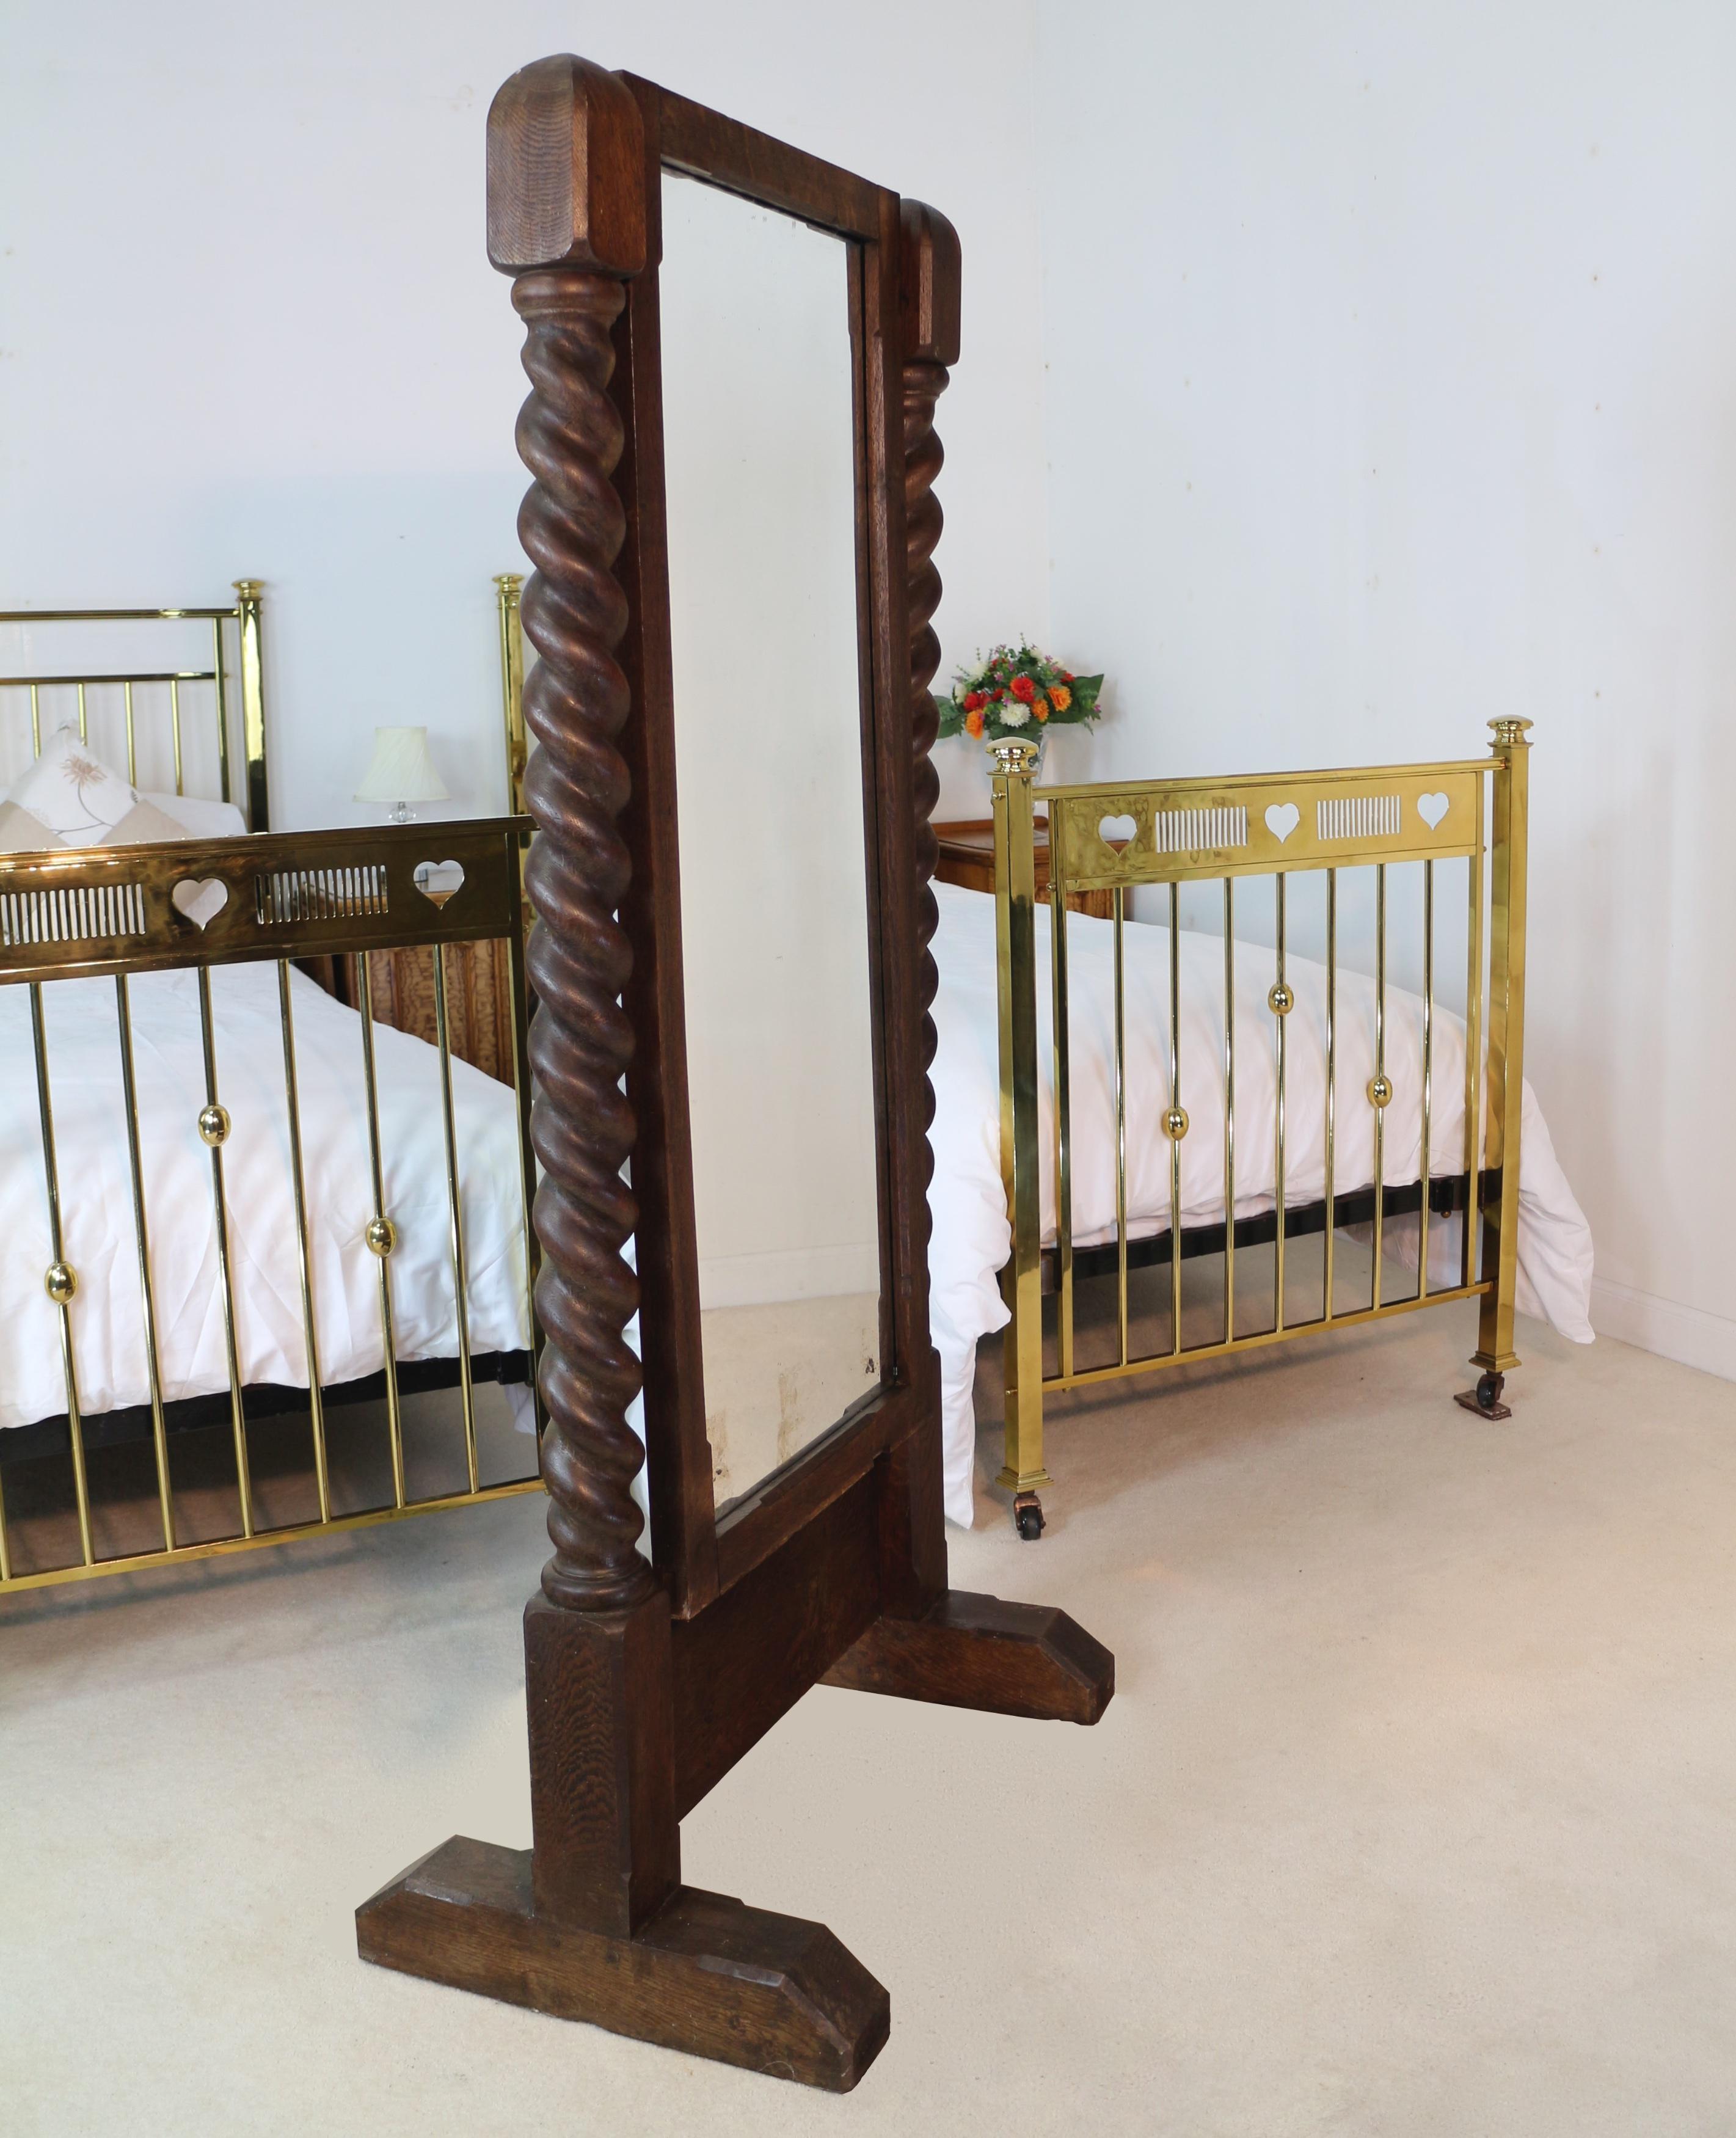 An unusual Victorian oak cheval mirror with barley twist columns and on shaped plinth supports, the chamfered edges to the finials, base and mirror frame give a distinct Arts & Crafts feel. In good condition with original colour and some quarter